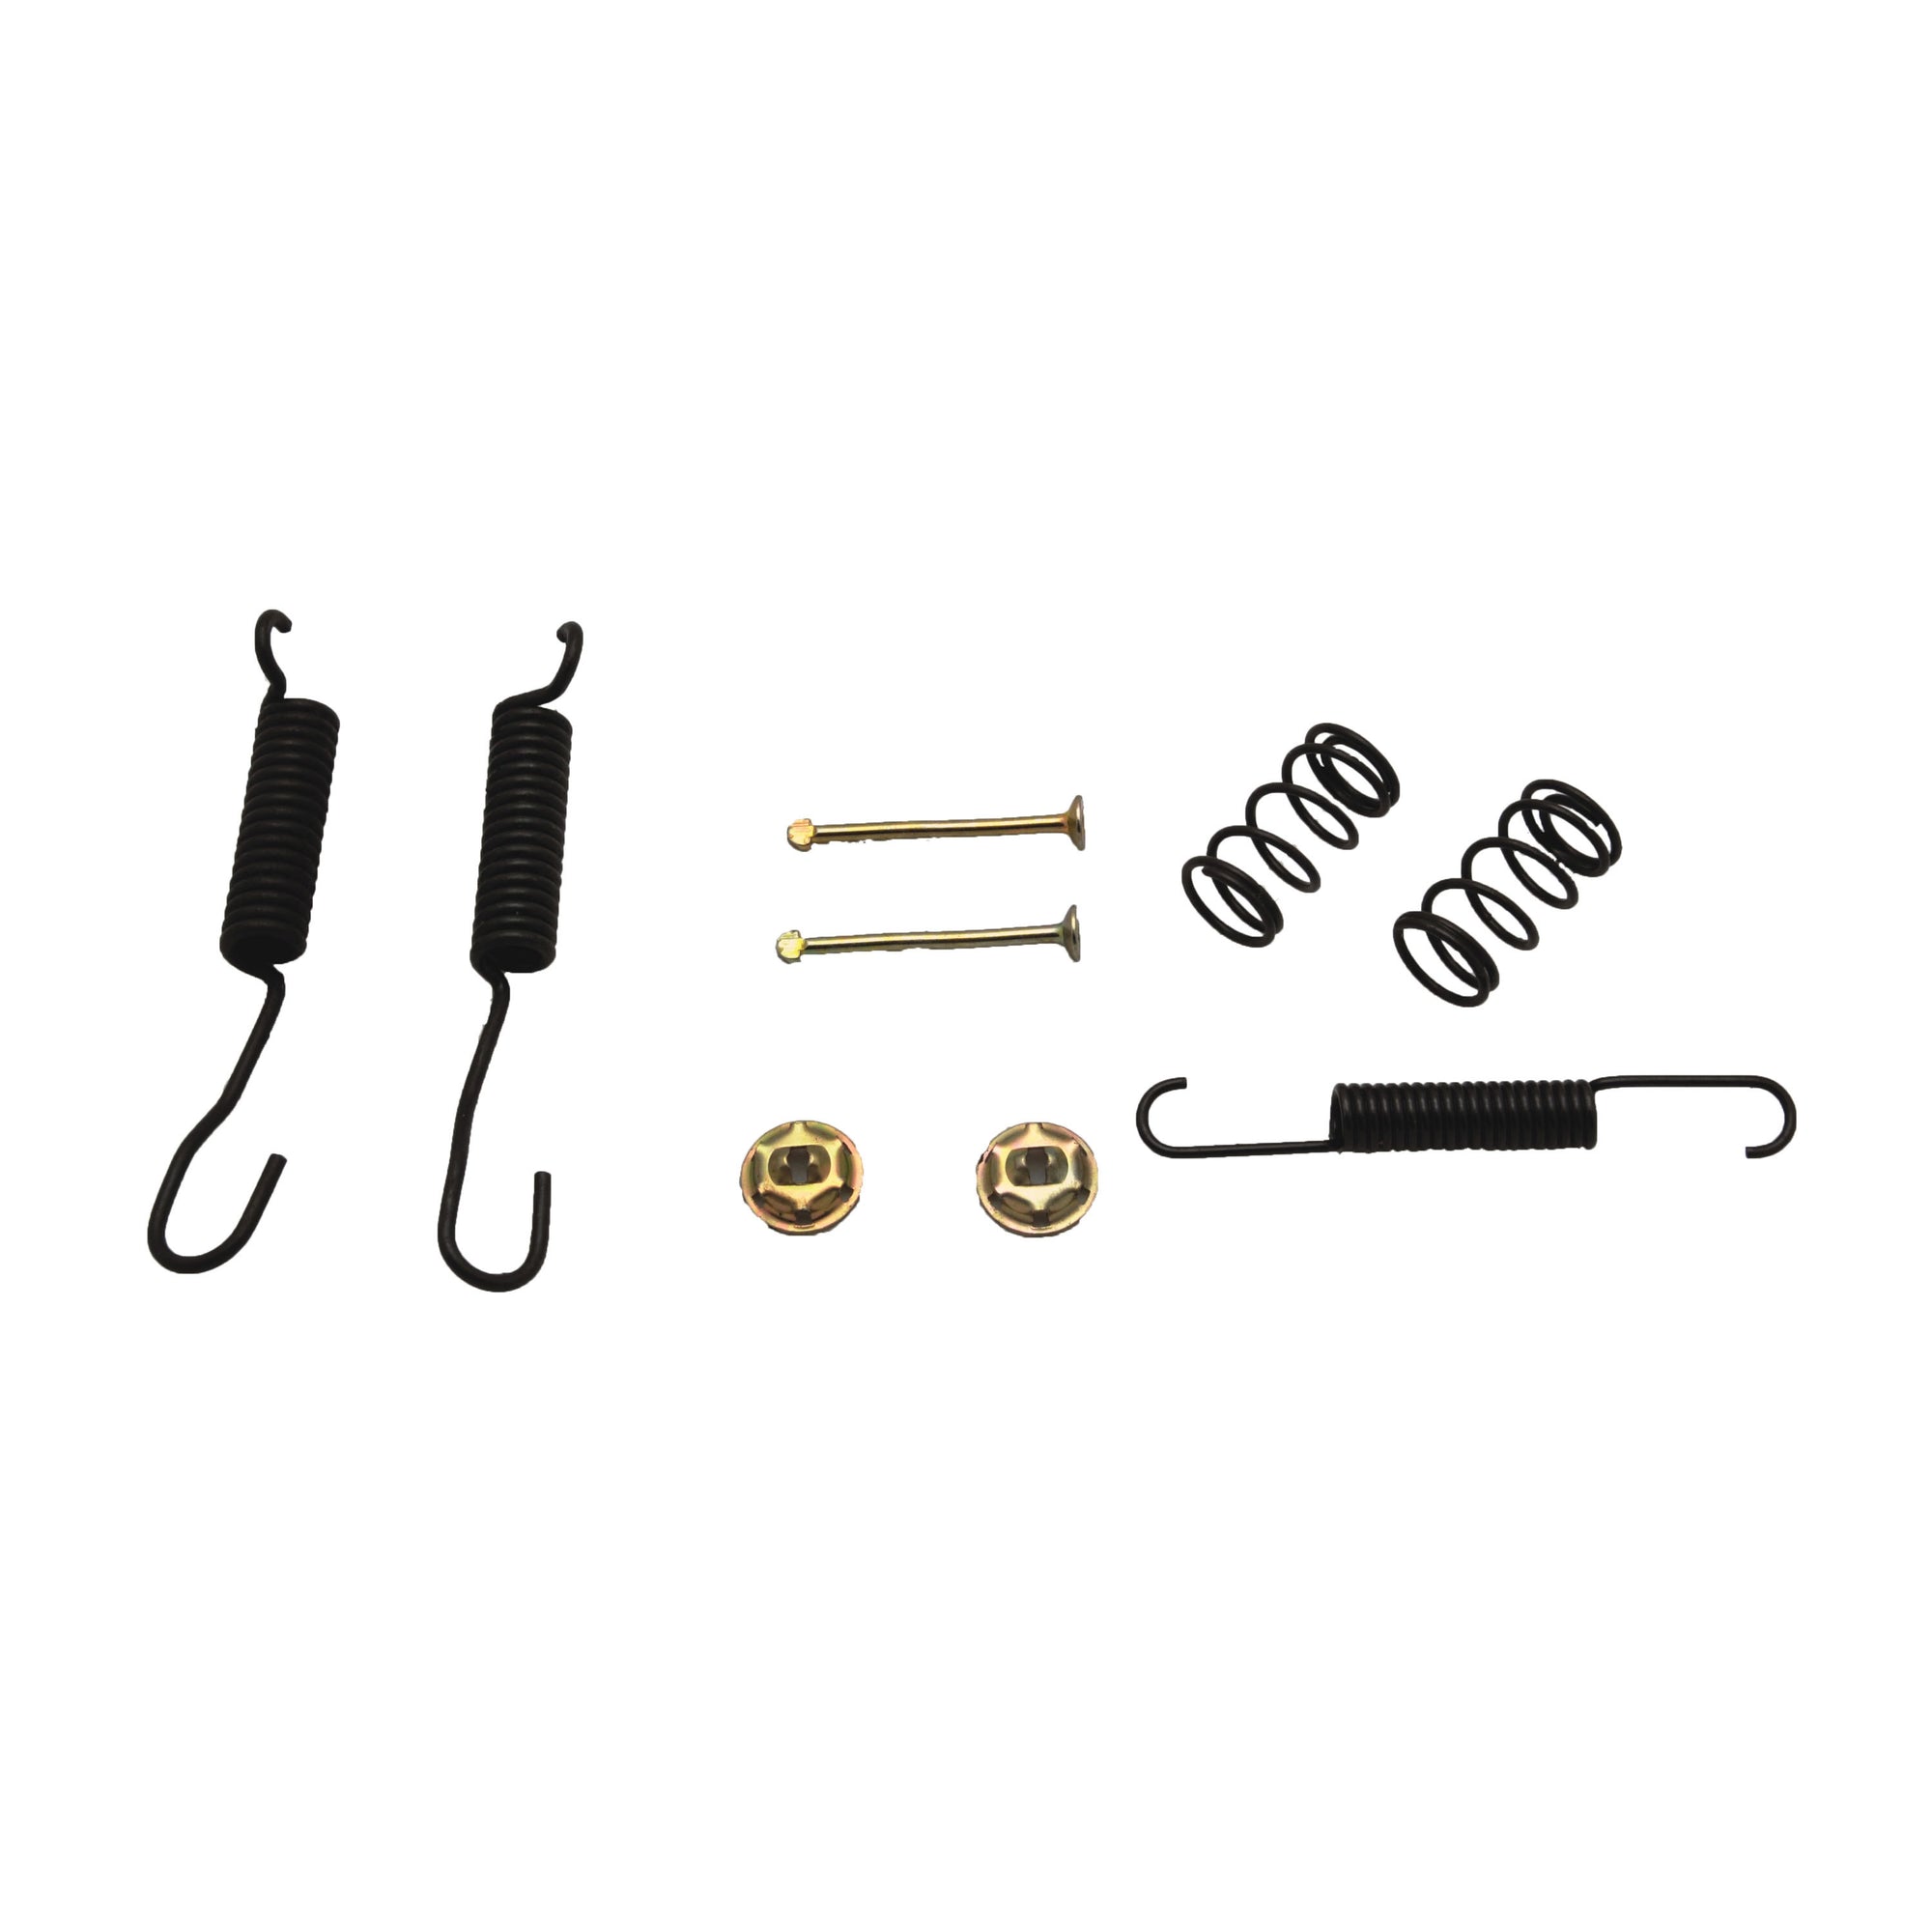 AP Products 014-136445 Electric Trailer Brake Replacement Parts 12" x 2" - Spring and Hardware Kit